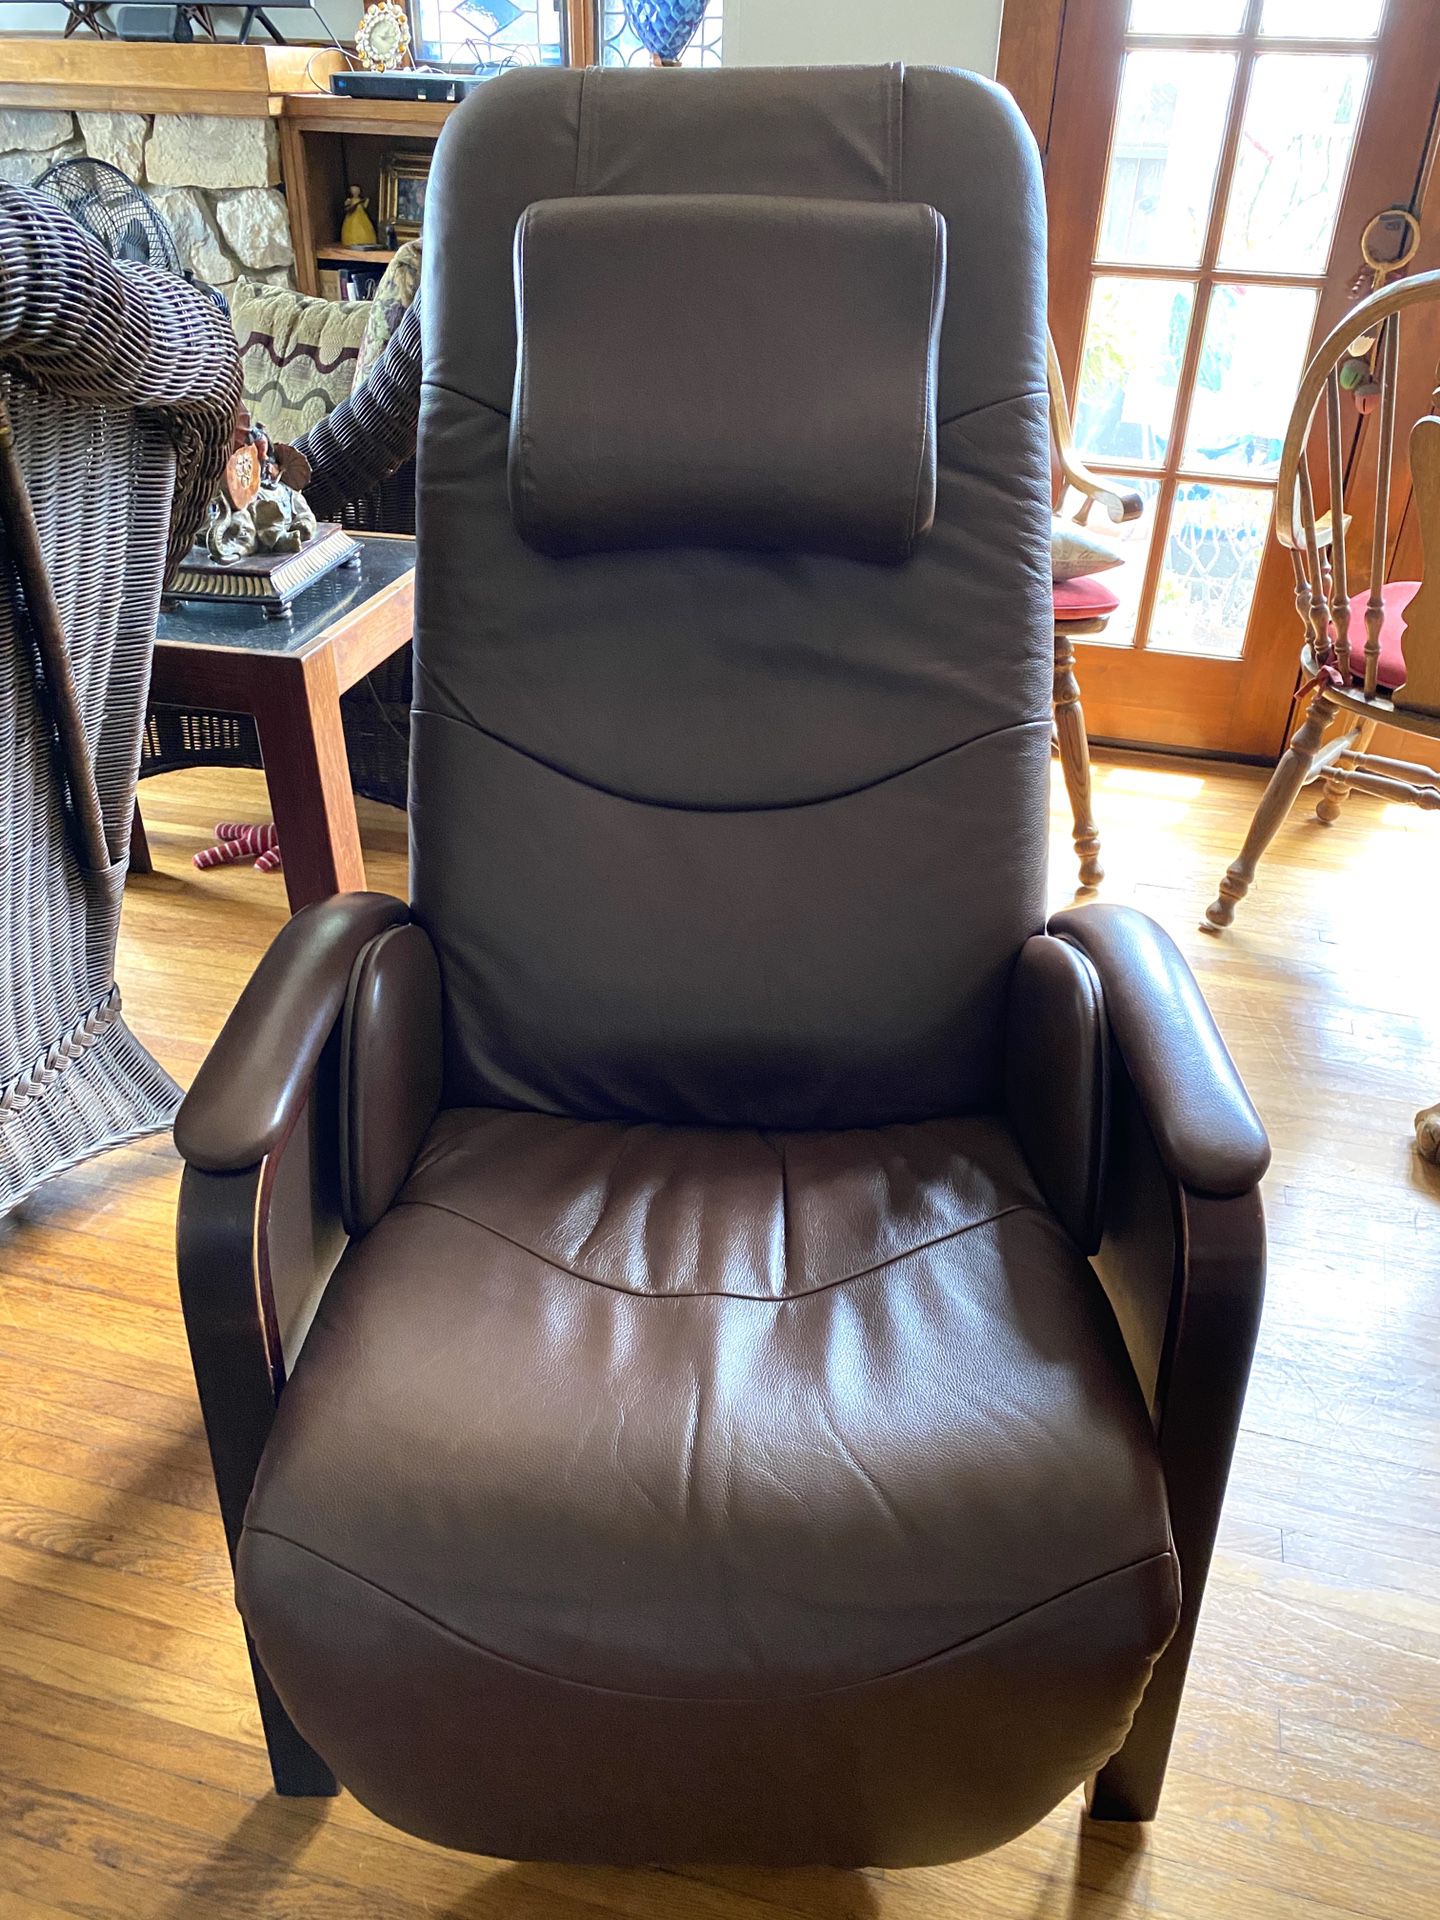 JUST REDUCED! Anti gravity brown leather chair (from Relax the Back Store)-normal wear in good condition.